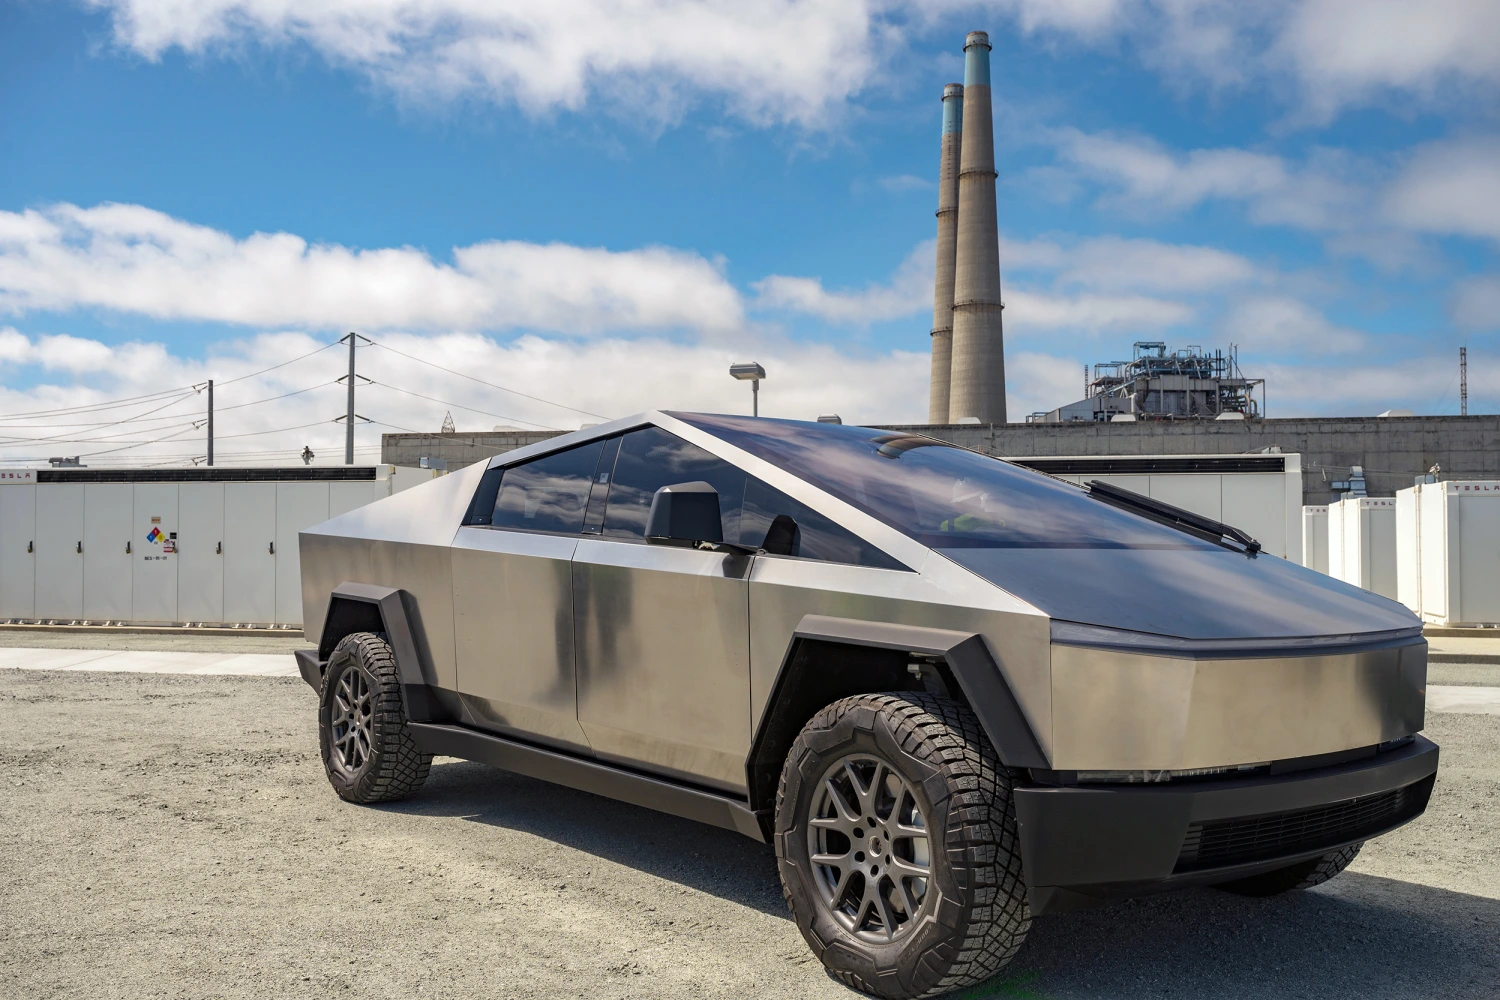 US Police Approach Elon Musk with Tesla Cybertruck Suggestion for a Possible Patrol Vehicle; Musk Responds